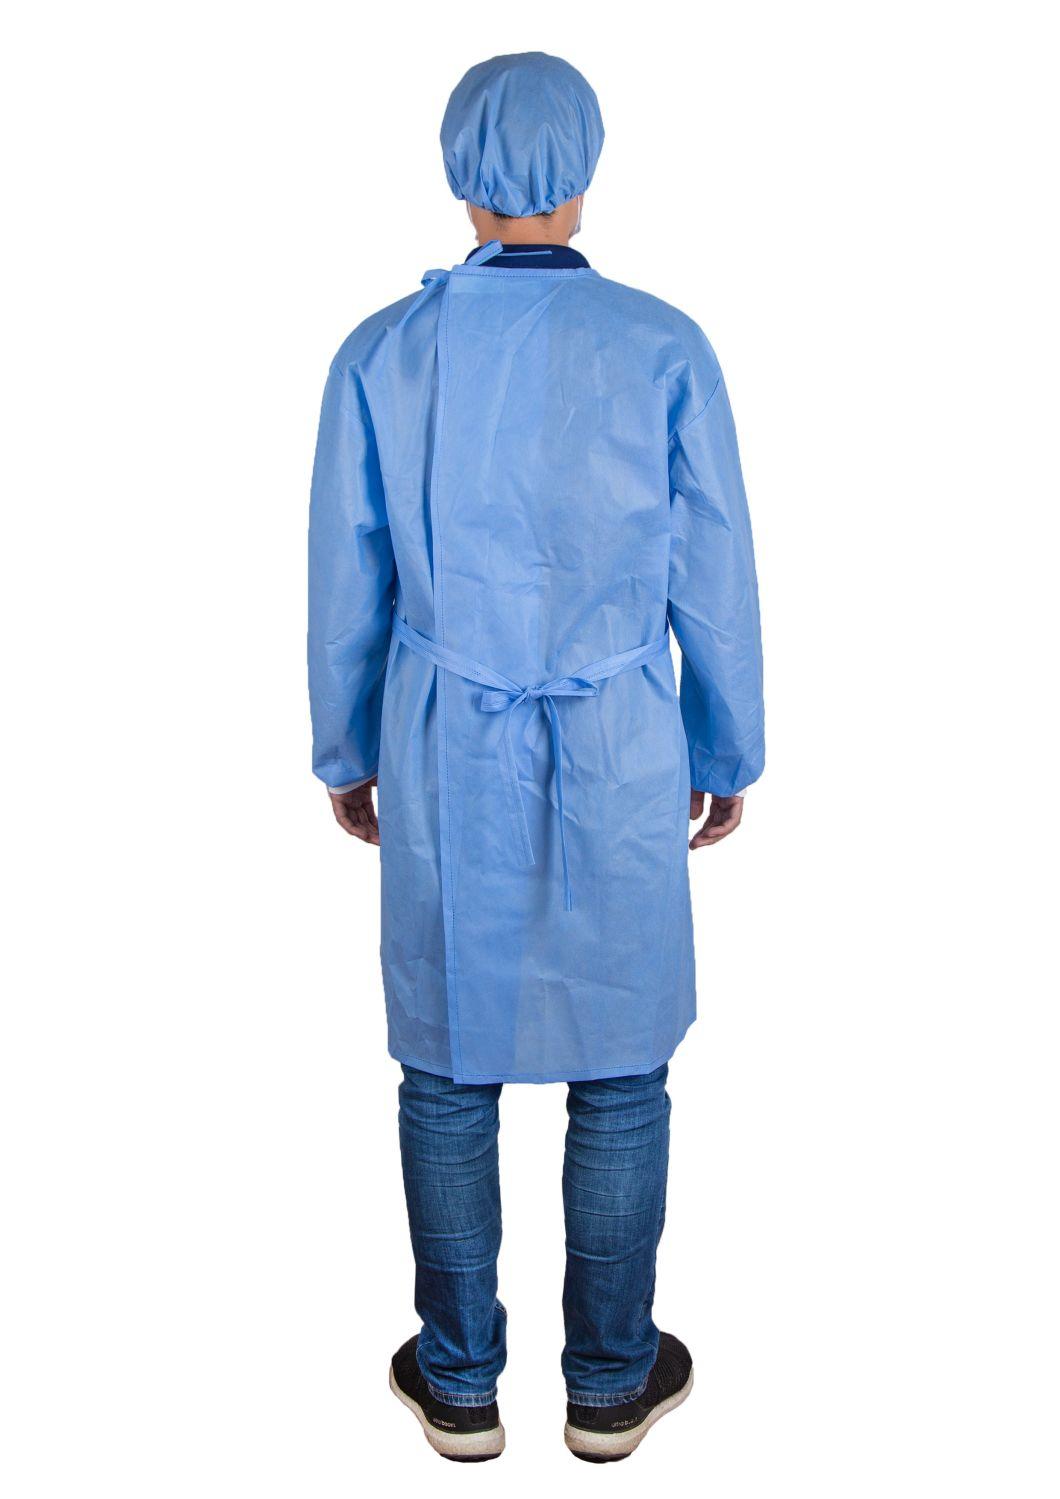 Manufacturer High Quality AAMI Level 3 Standard Surgical Gowns SMS Disposable for Hospital